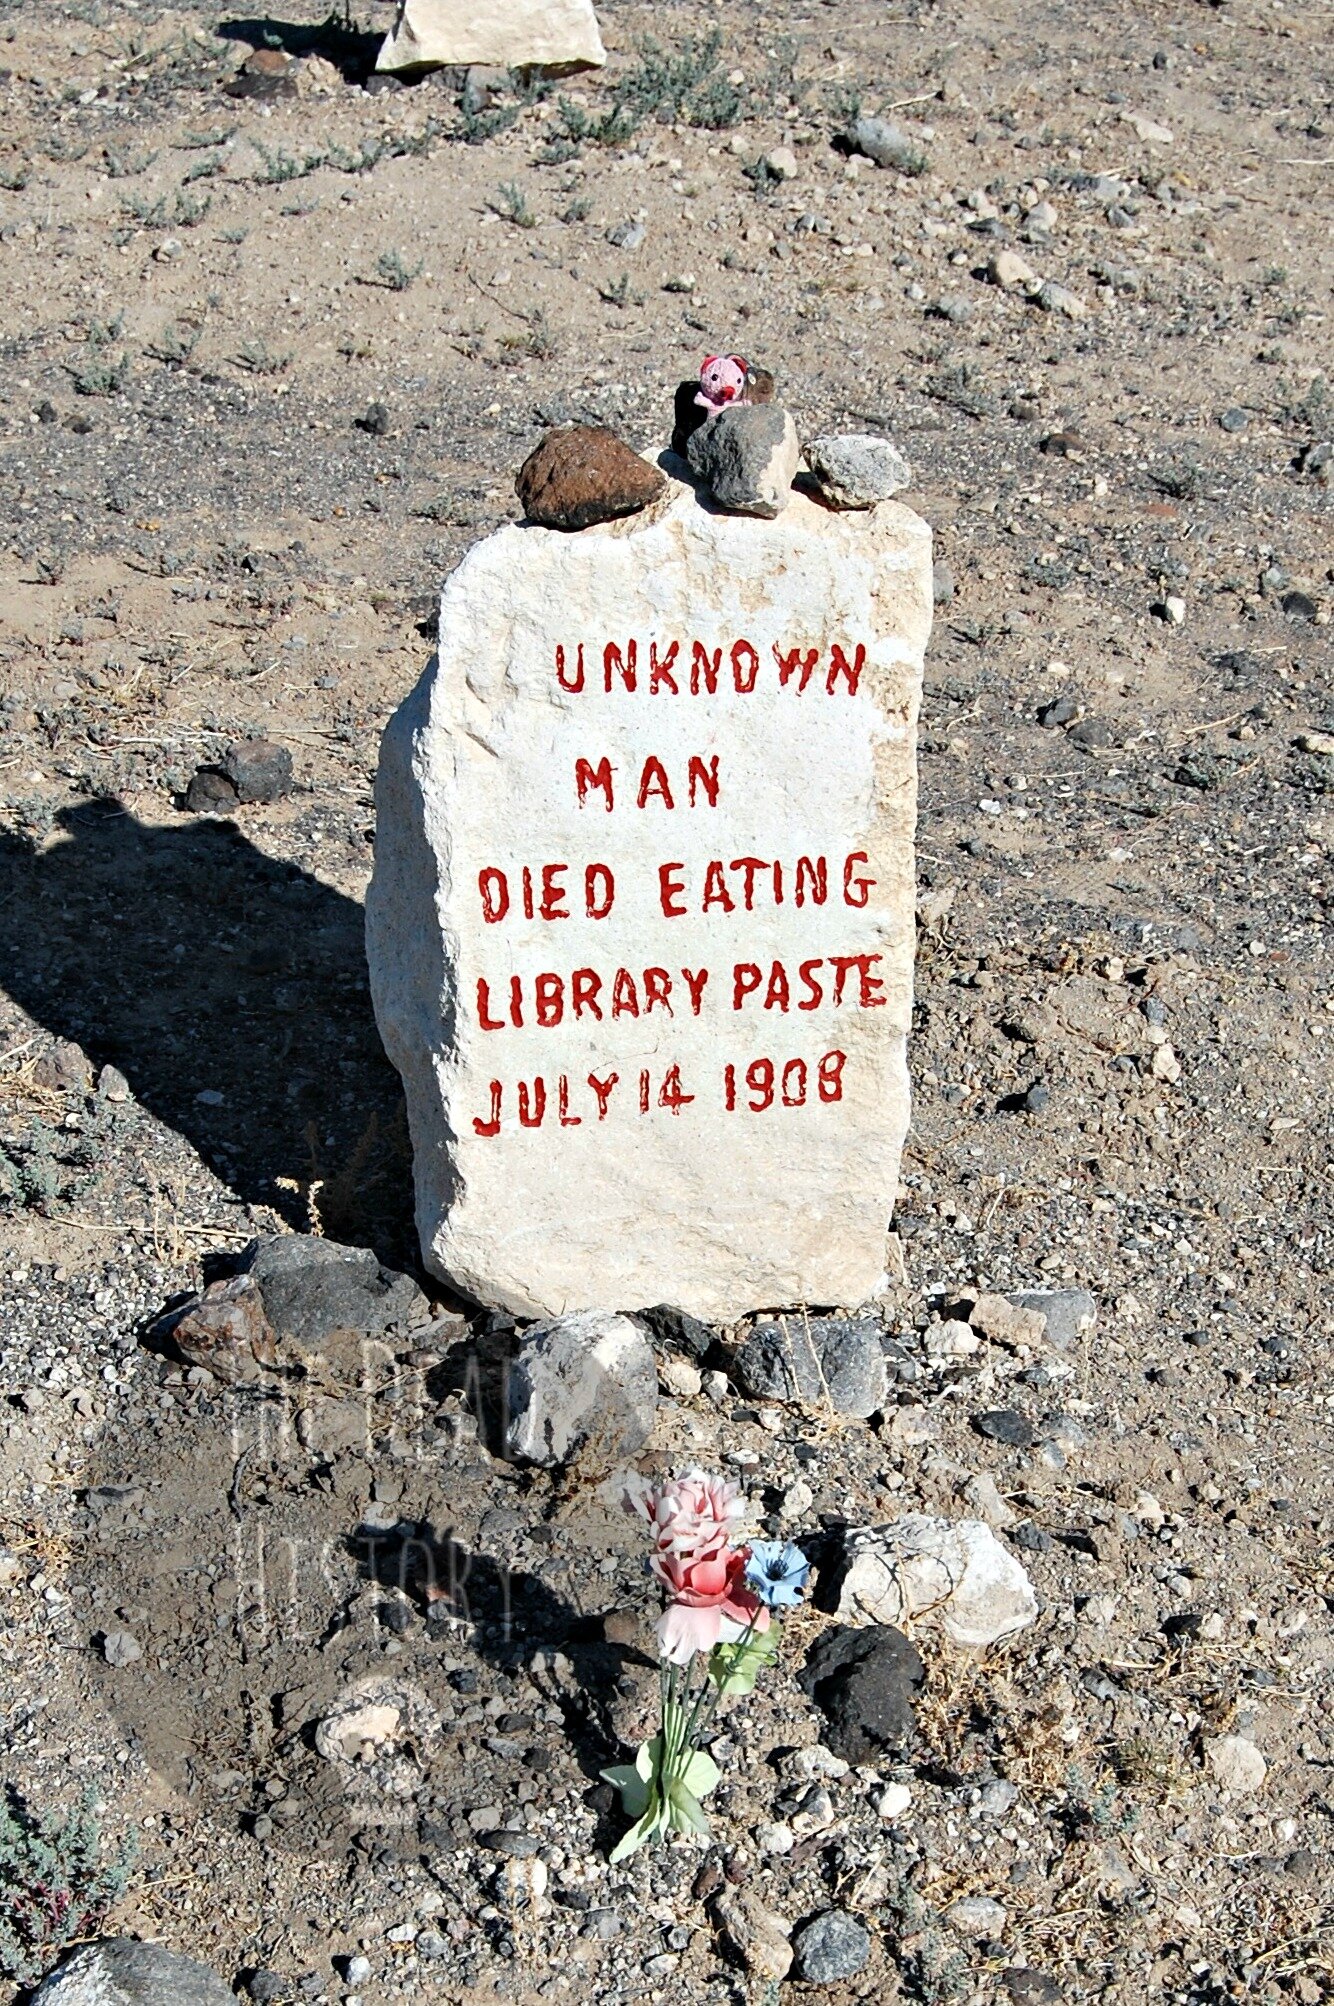 Unknown Man Died Eating Library Paste - The Dead History